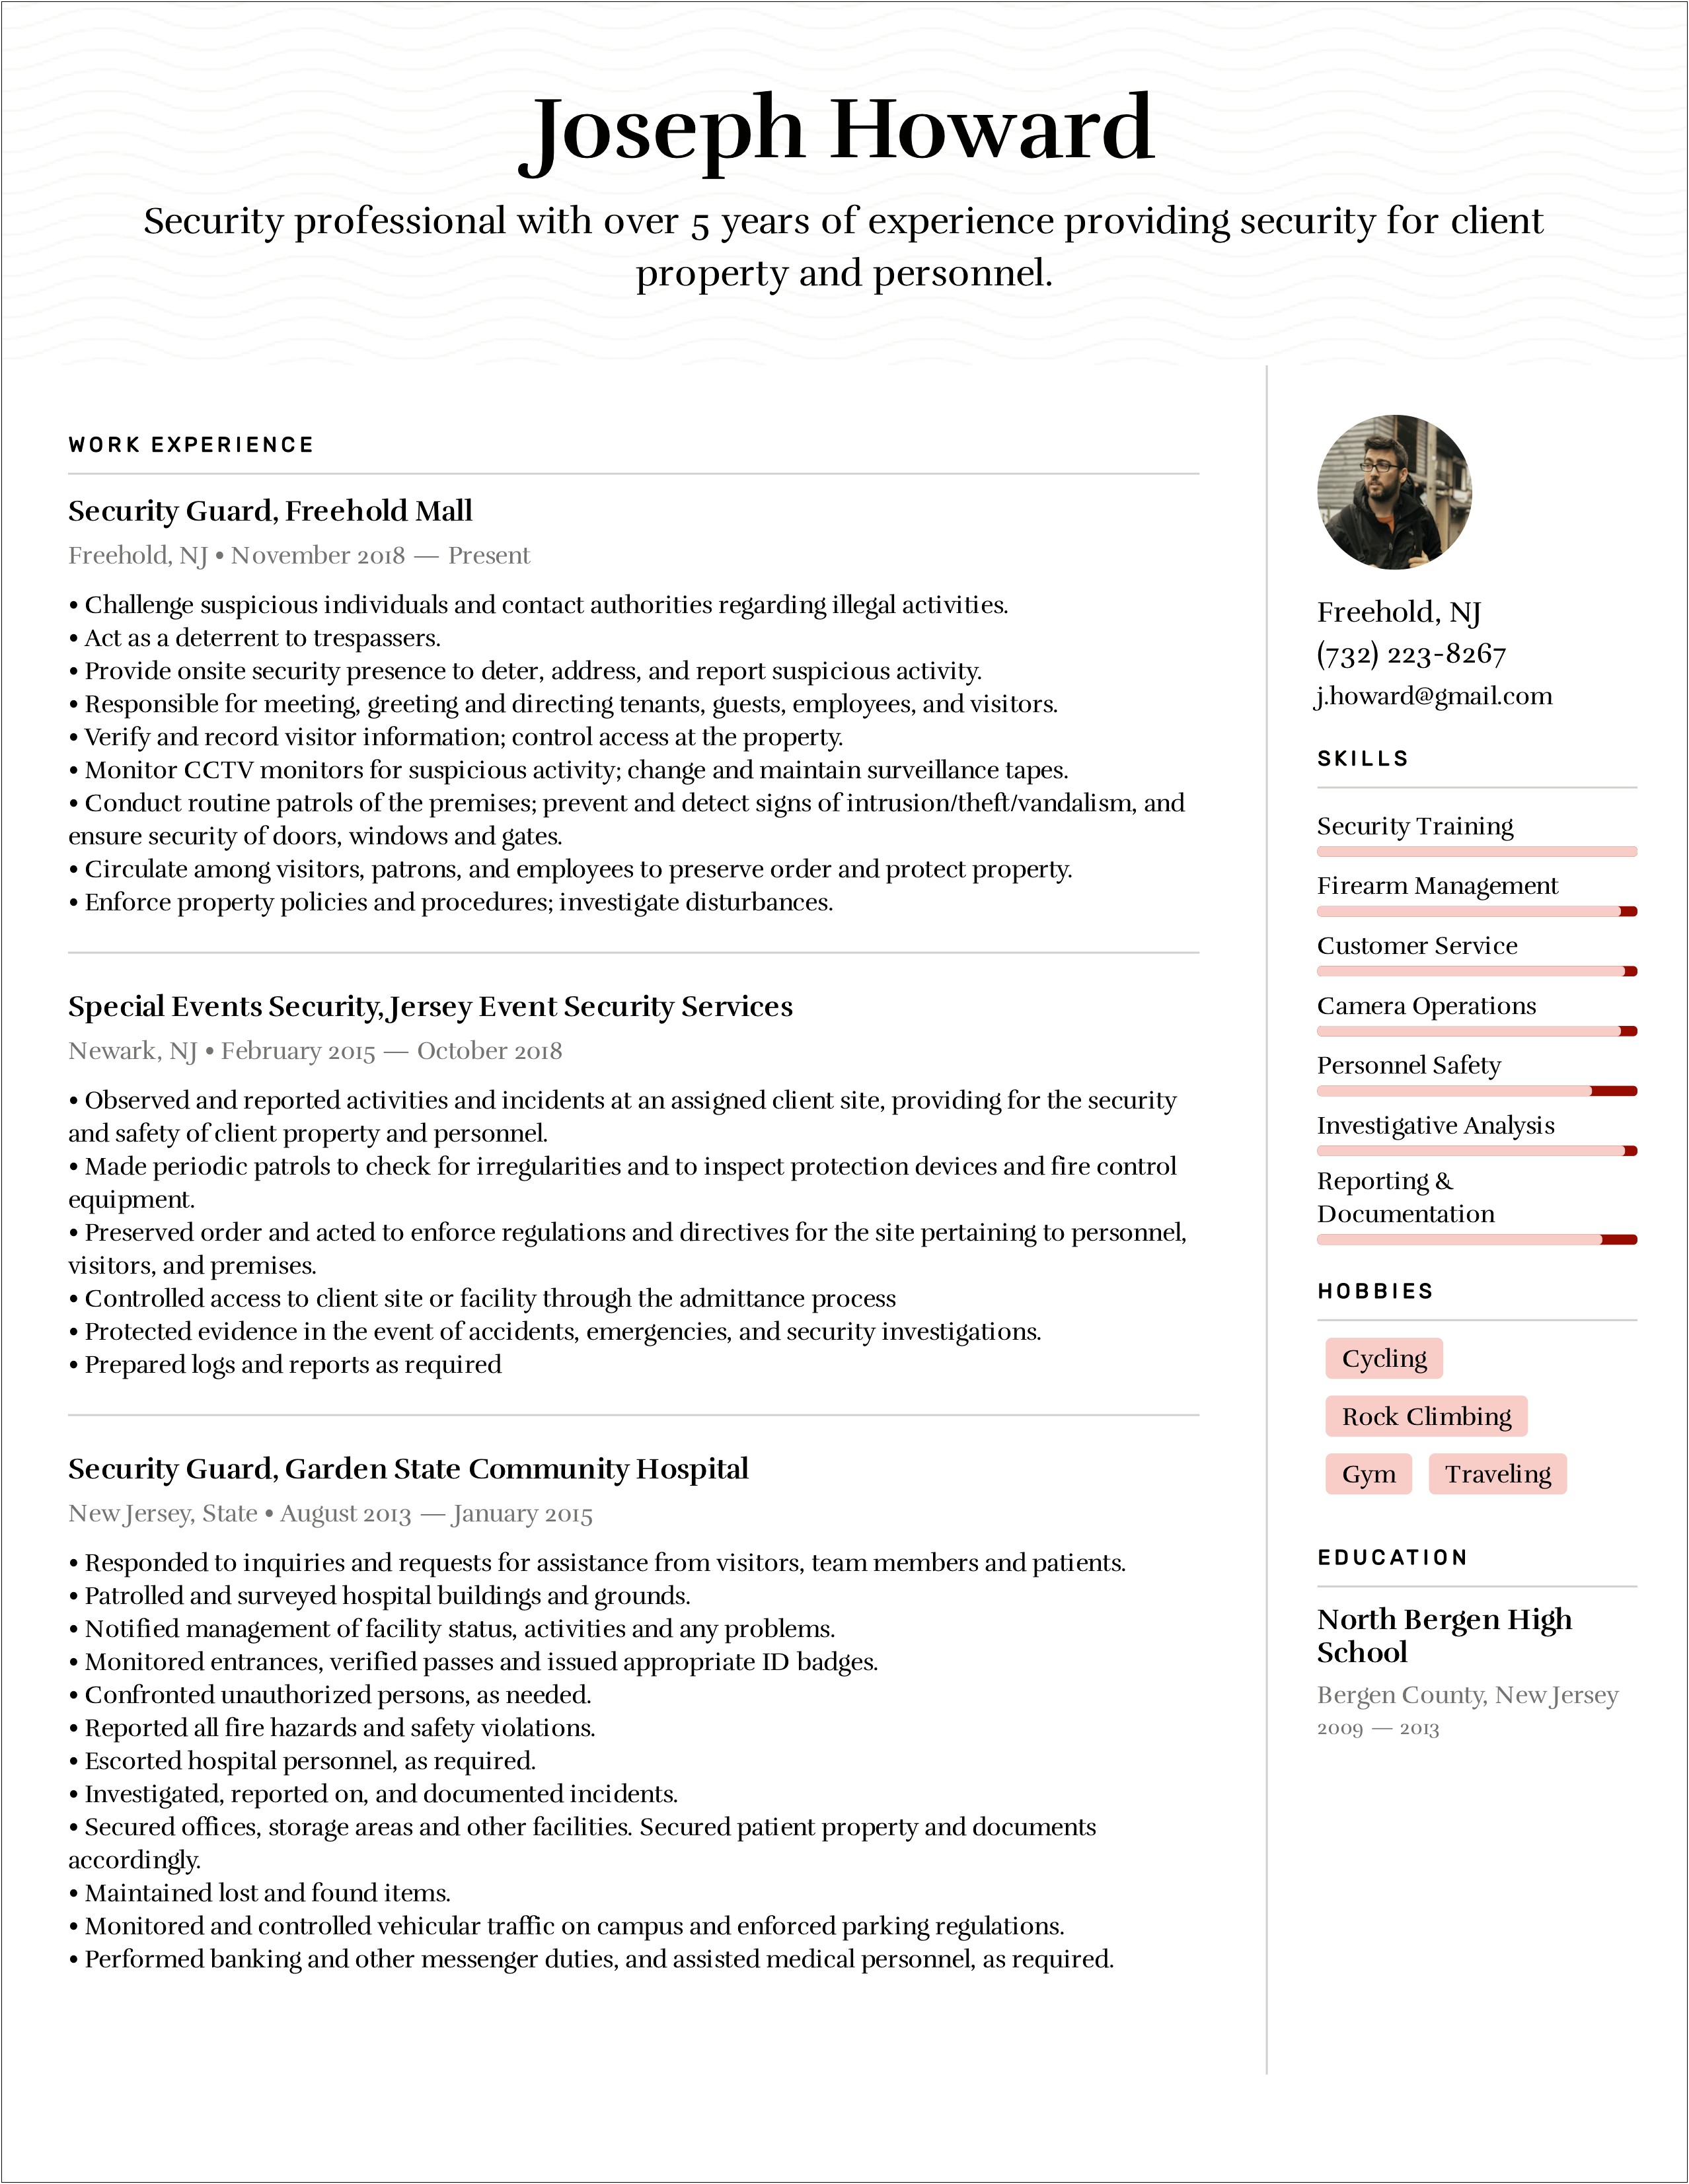 Sample Resume For Security Technician